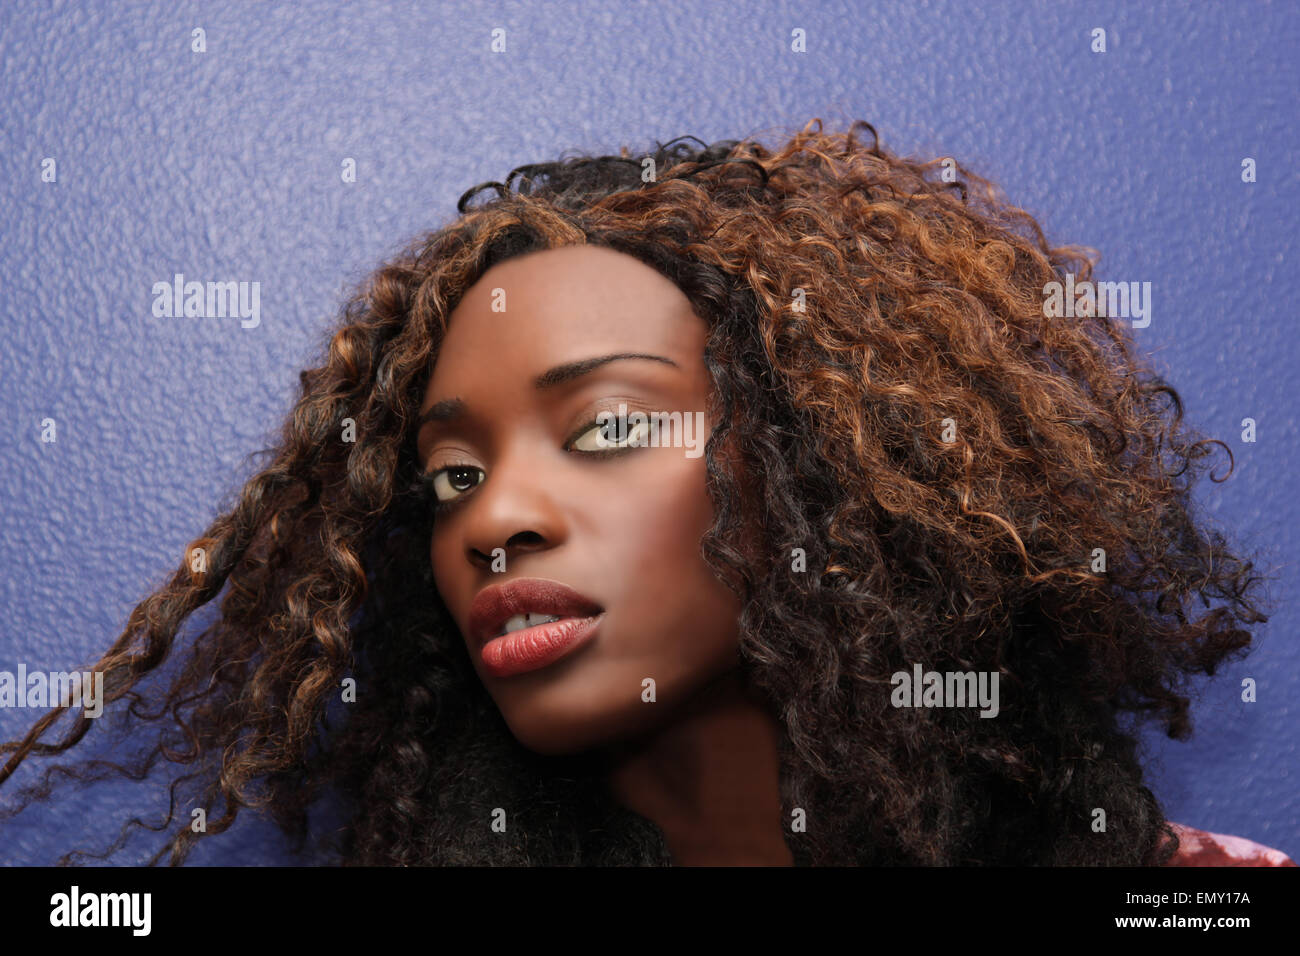 Black woman with unusual wavy hair and sultry eyes. Stock Photo